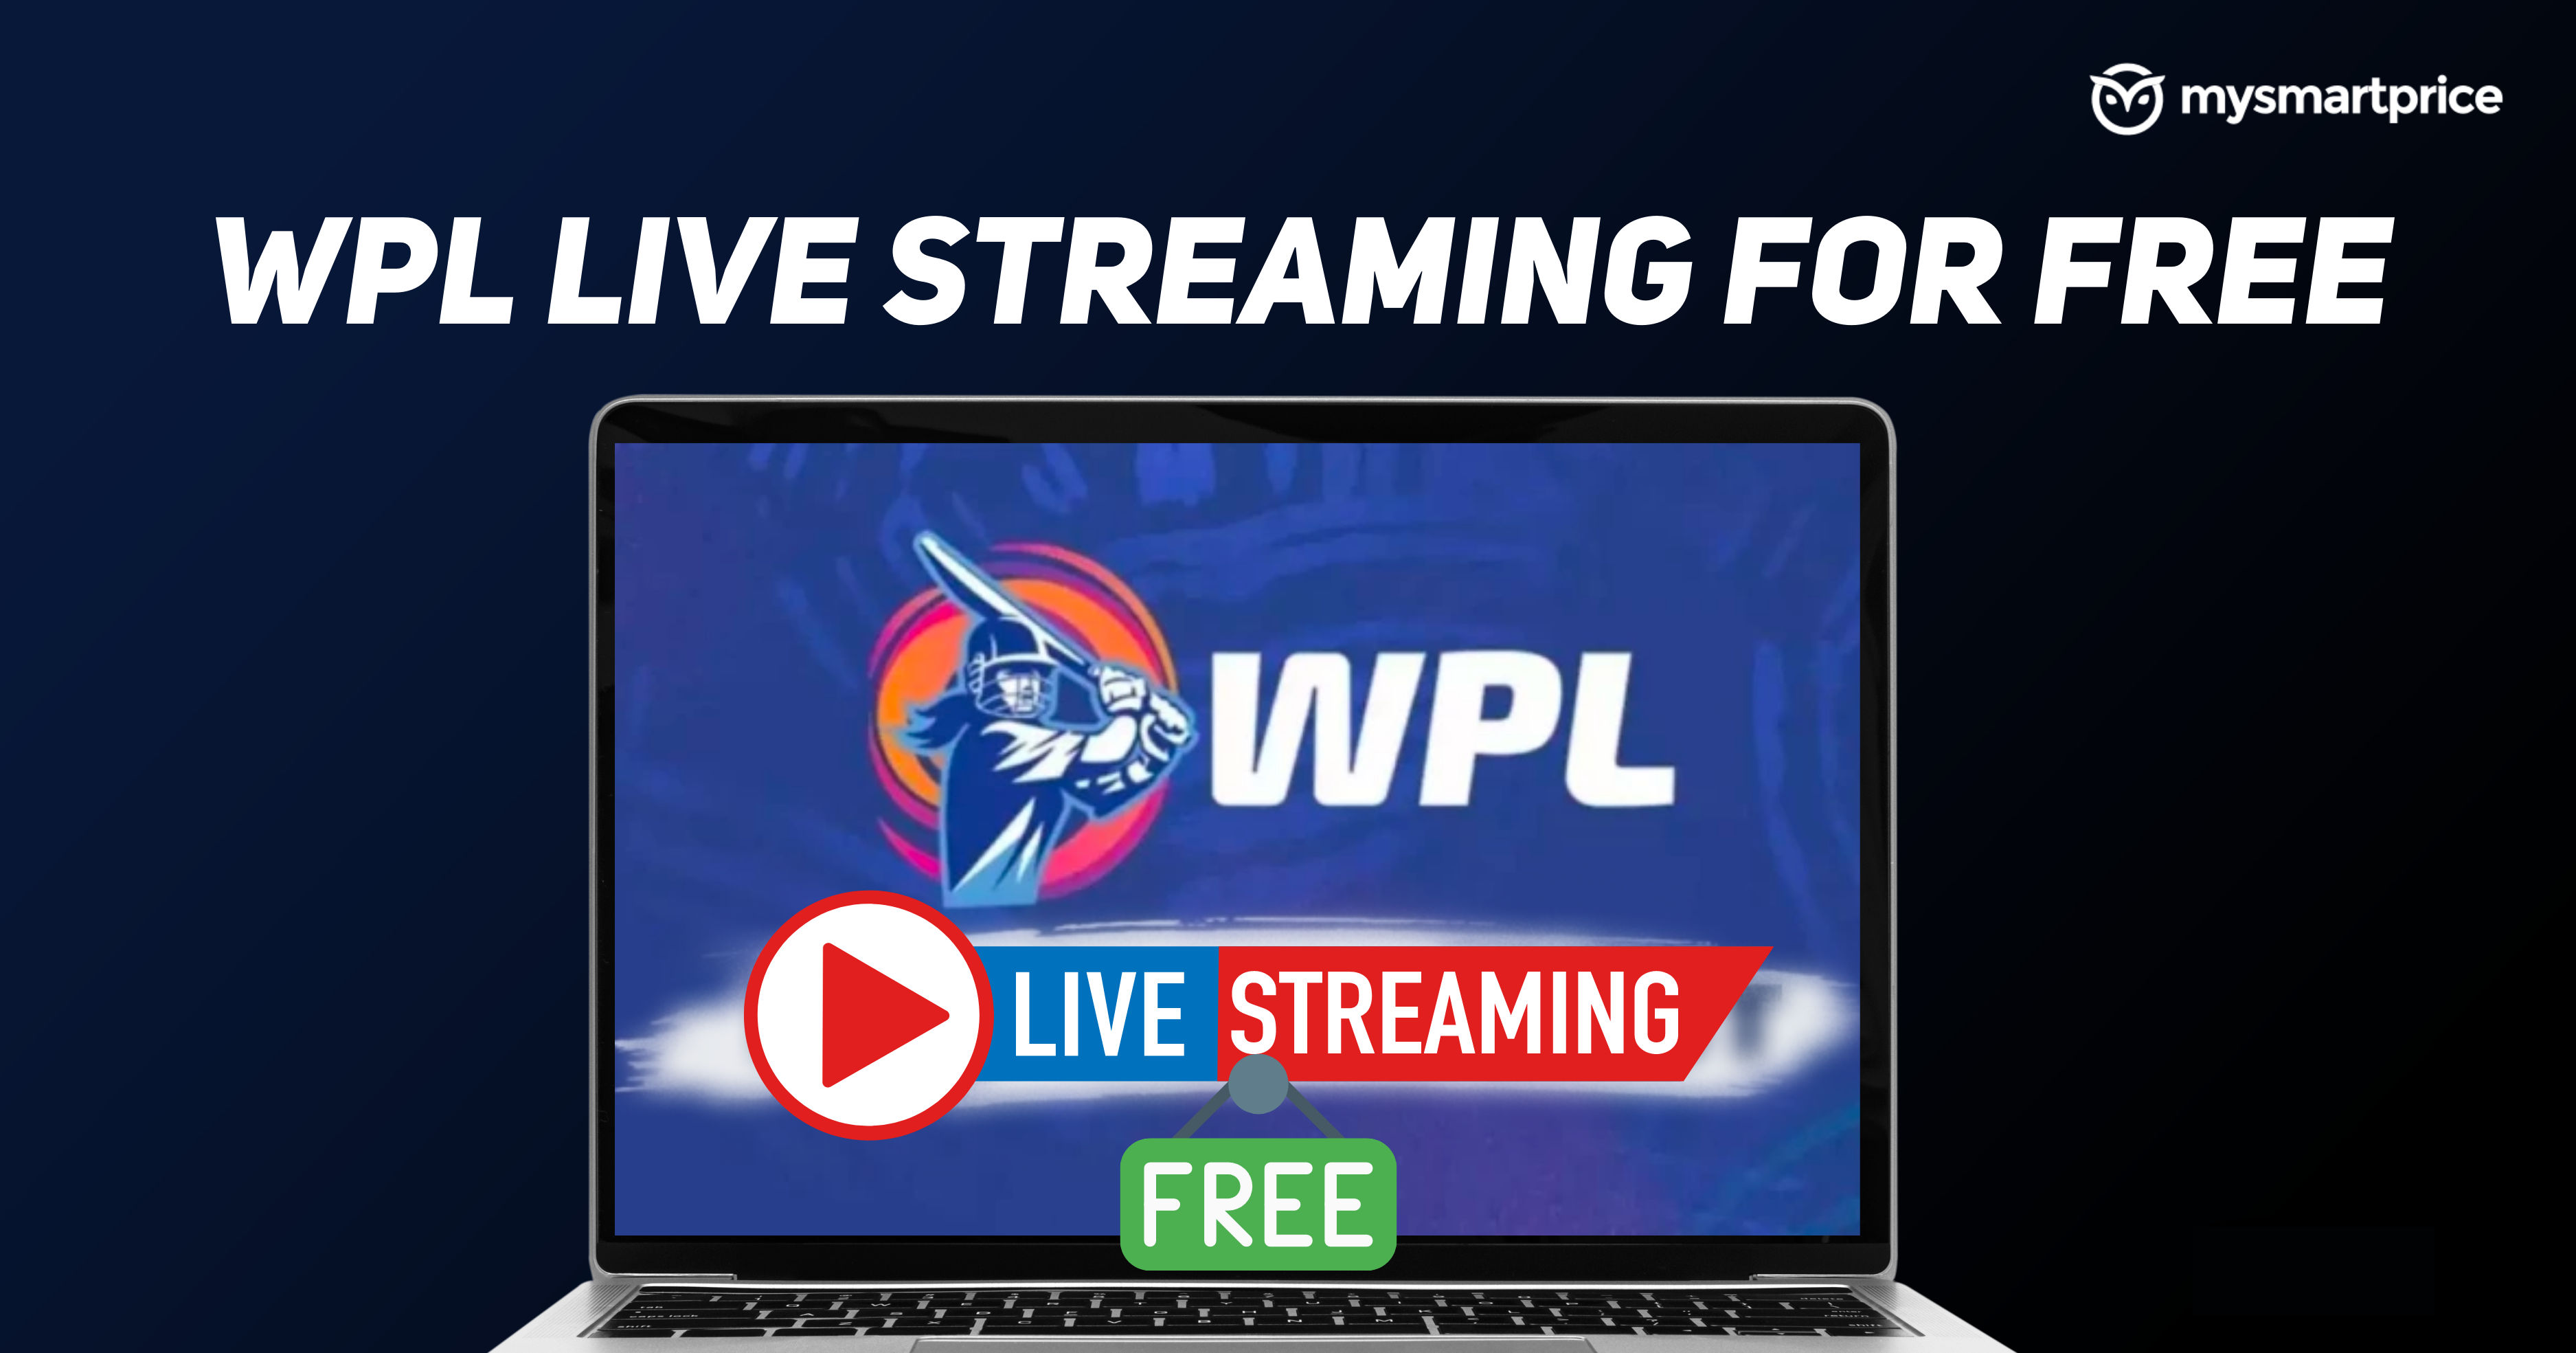 WPL 2023 Live Streaming FREE on Jio Cinema How to Watch Delhi Capitals vs Gujarat Giants T20 Match Online on Mobile, TV and Laptop